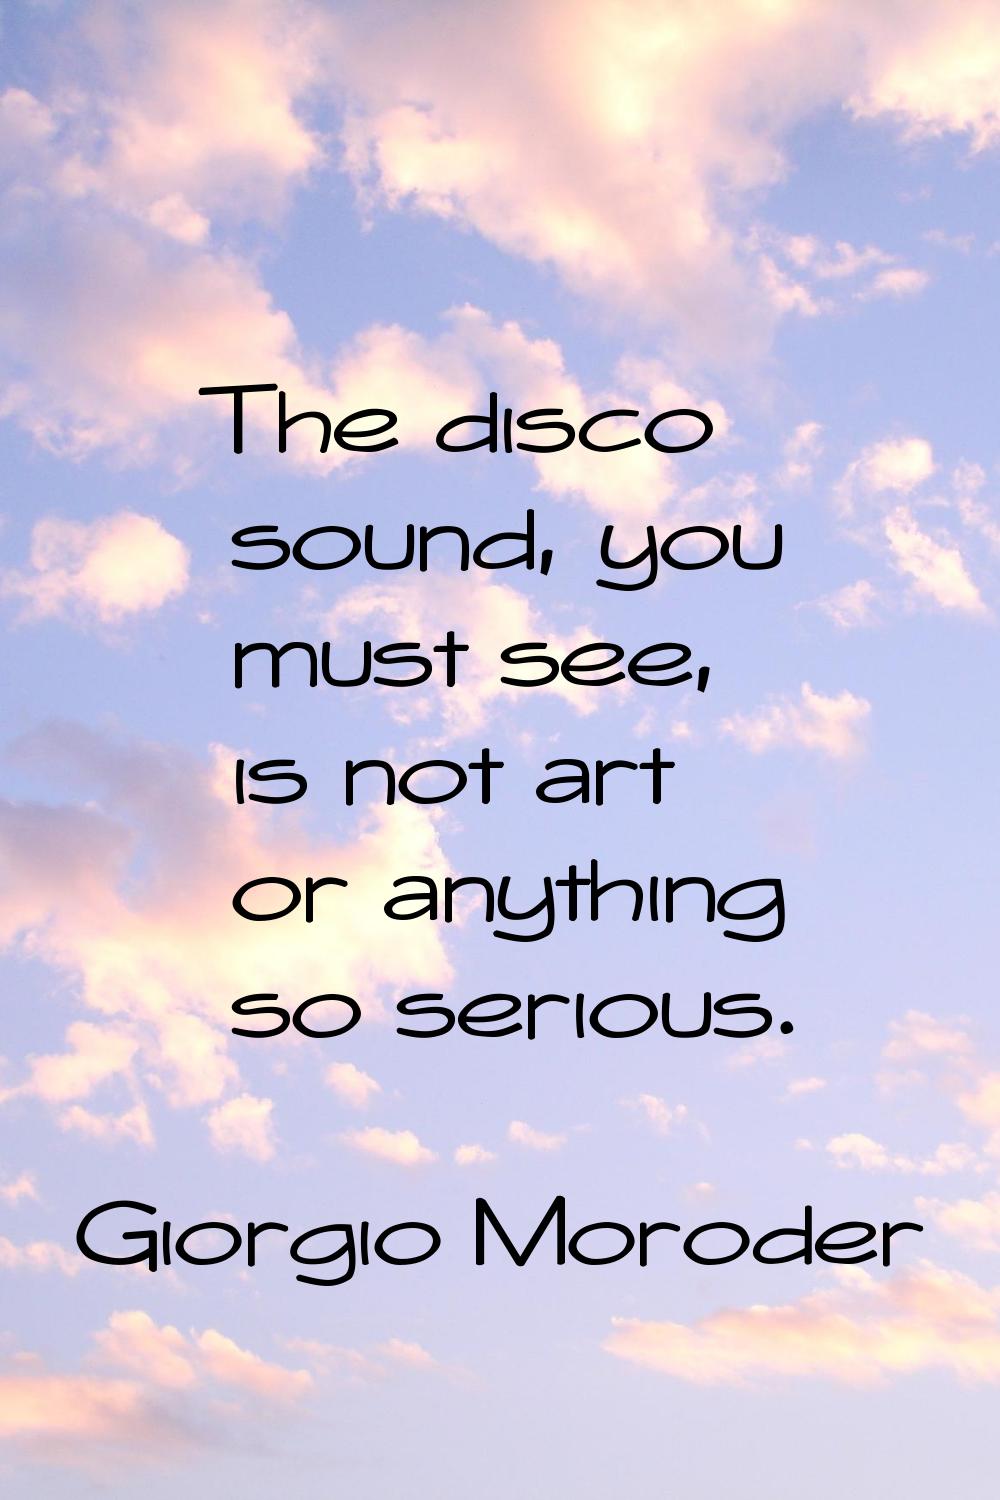 The disco sound, you must see, is not art or anything so serious.